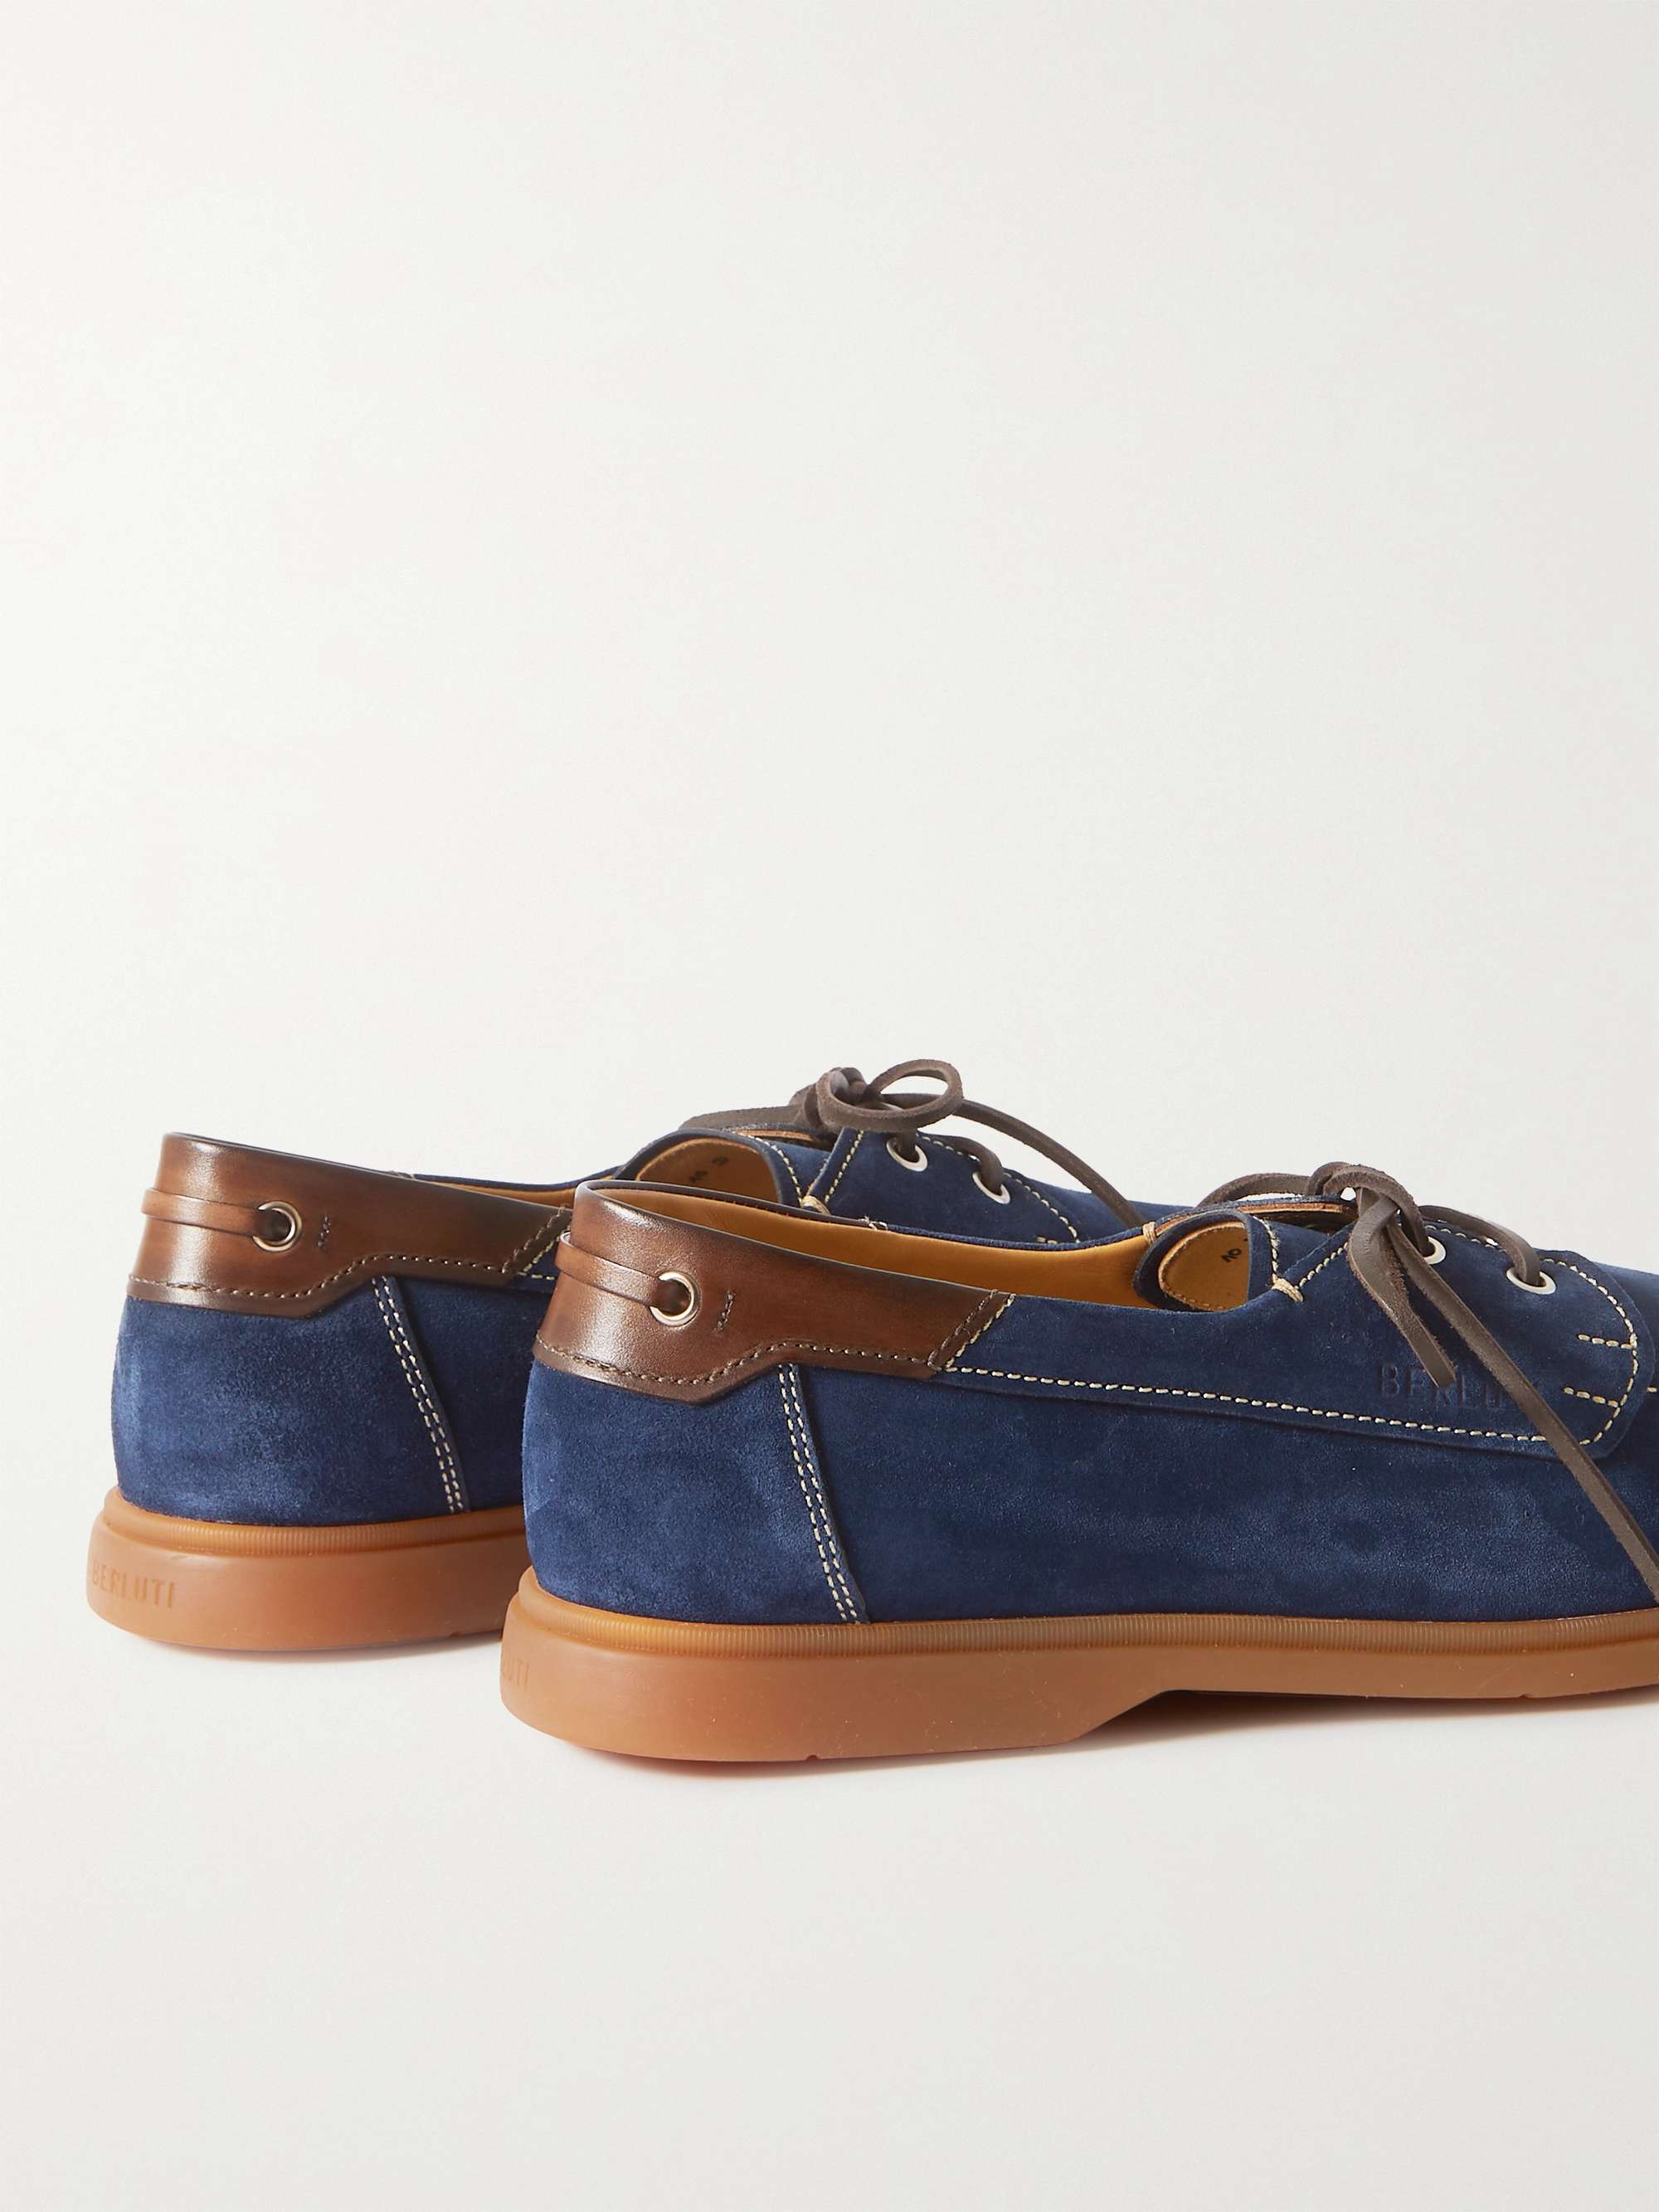 BERLUTI Latitude Leather-Trimmed Suede Boat Shoes